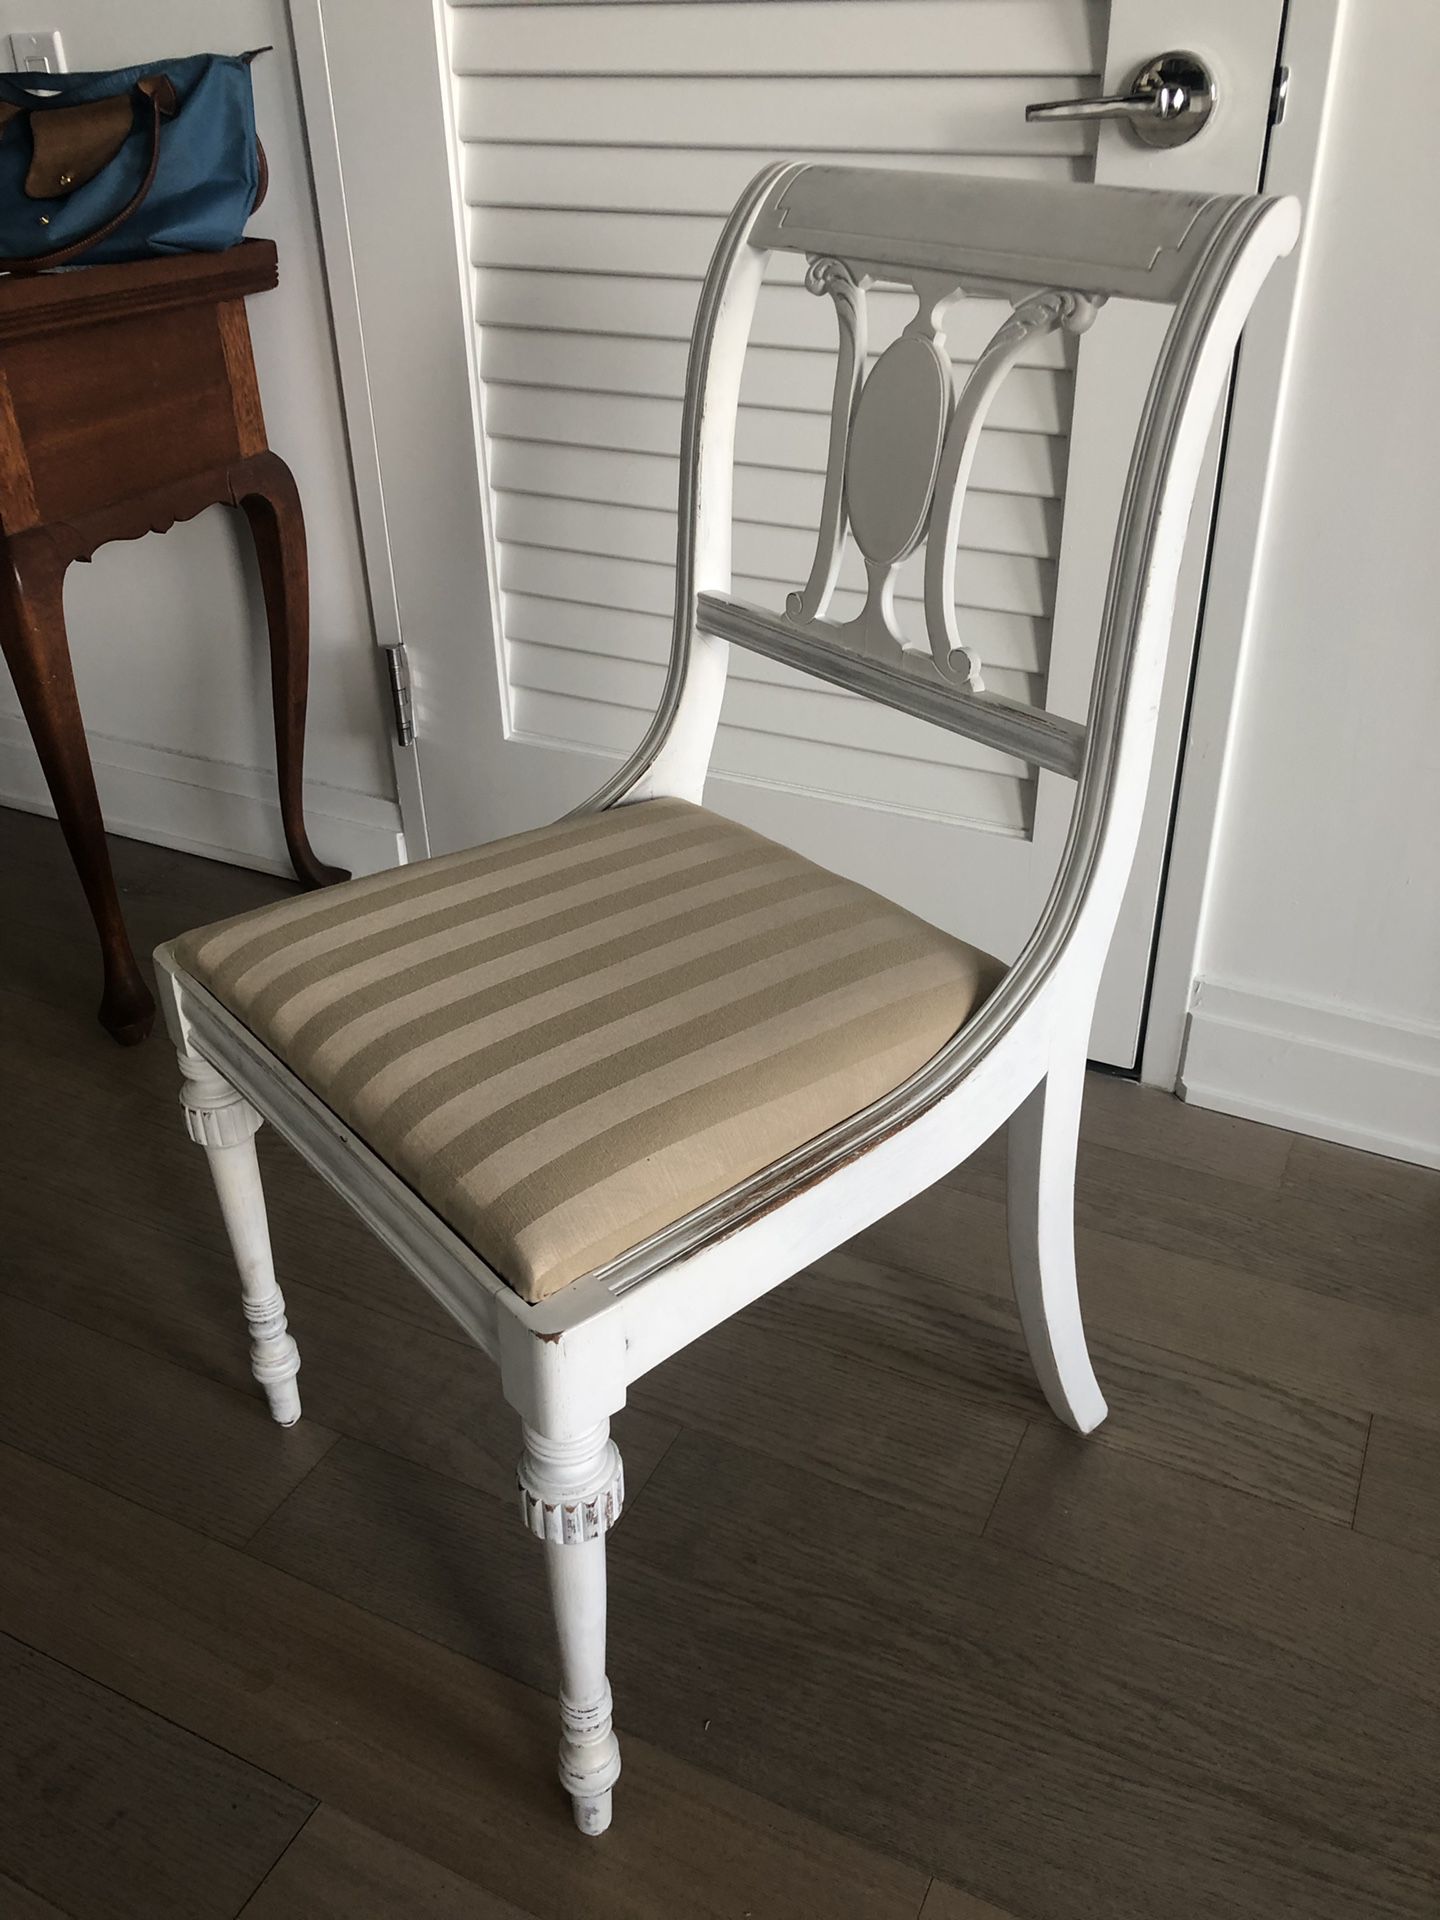 White chair, new upholstery, great condition - $10 or best offer